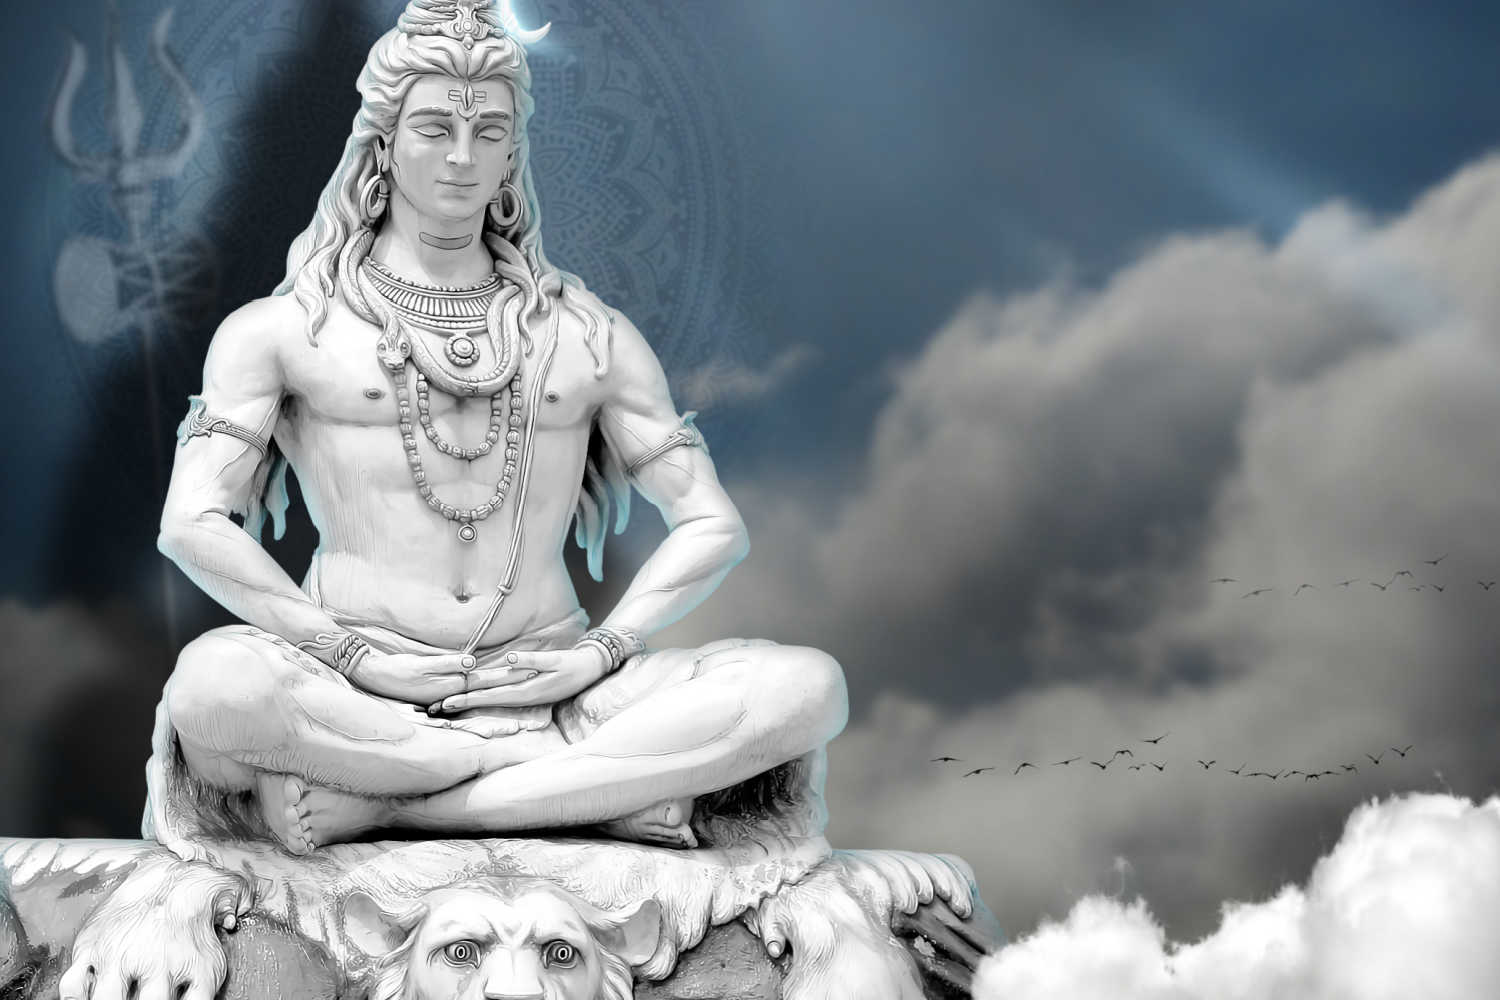 Unique Baby Boy Names Inspired by Lord Shiva - Being The Parent